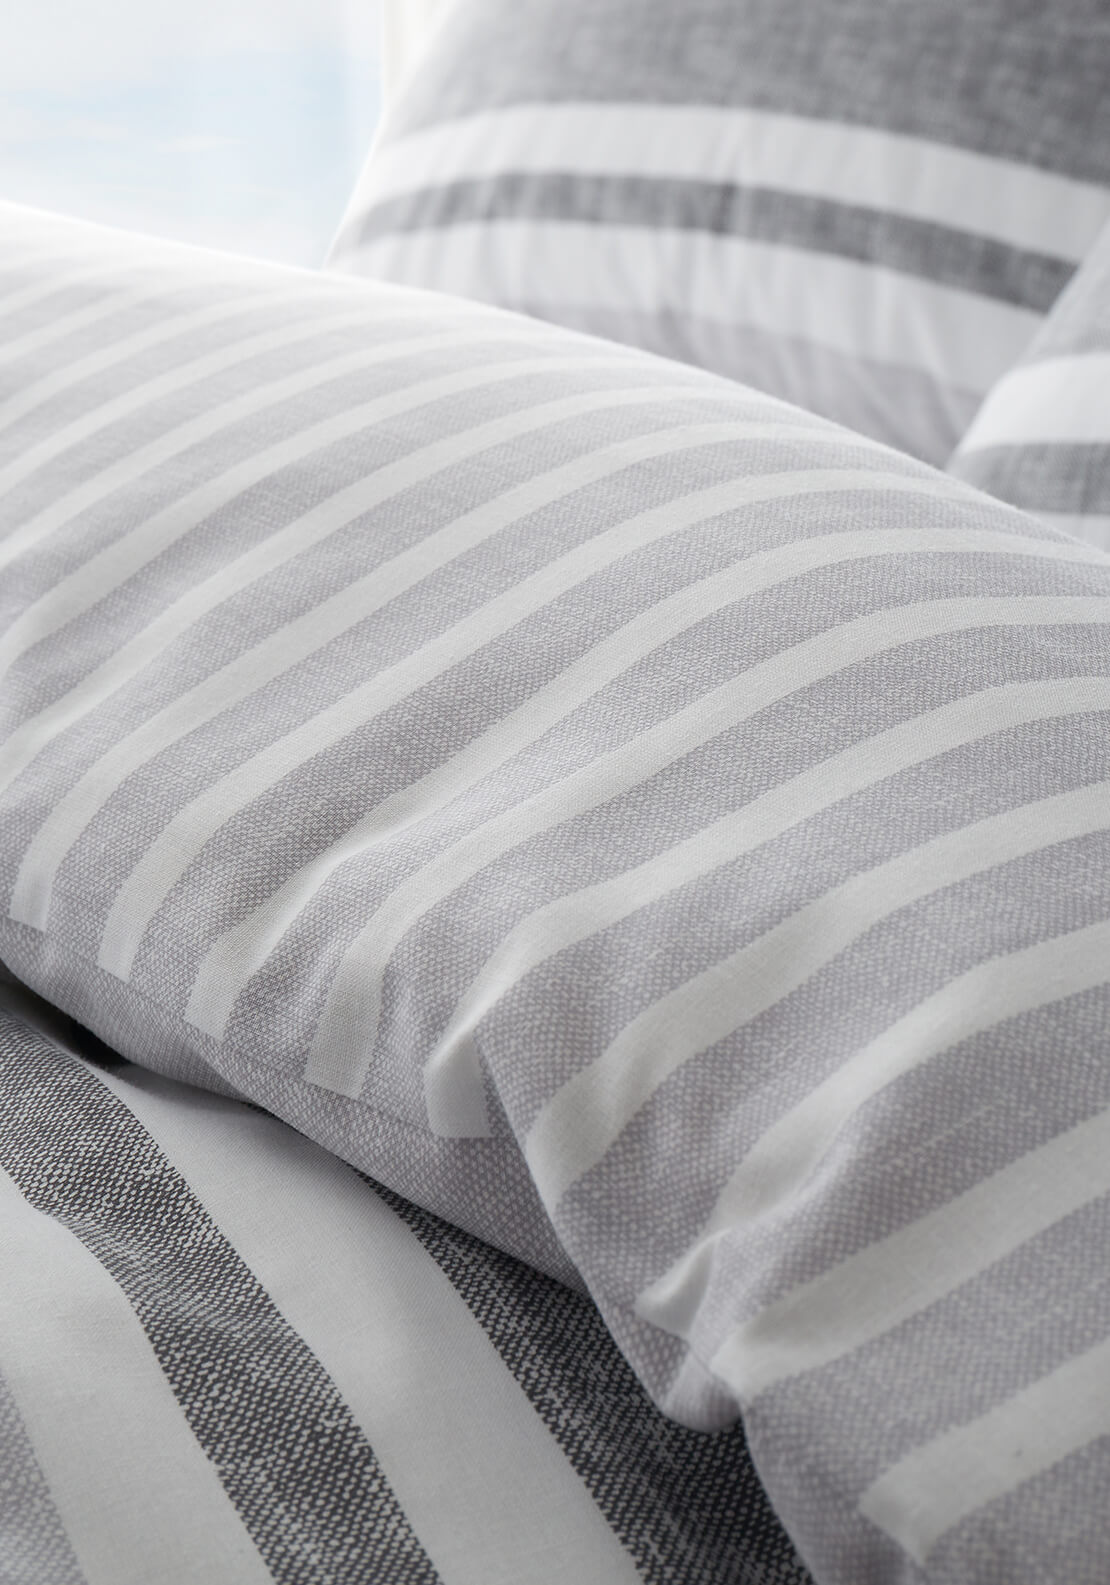  The Home Collection Classic Textured Banded Stripe Reversible Duvet Cover Set - Grey 3 Shaws Department Stores